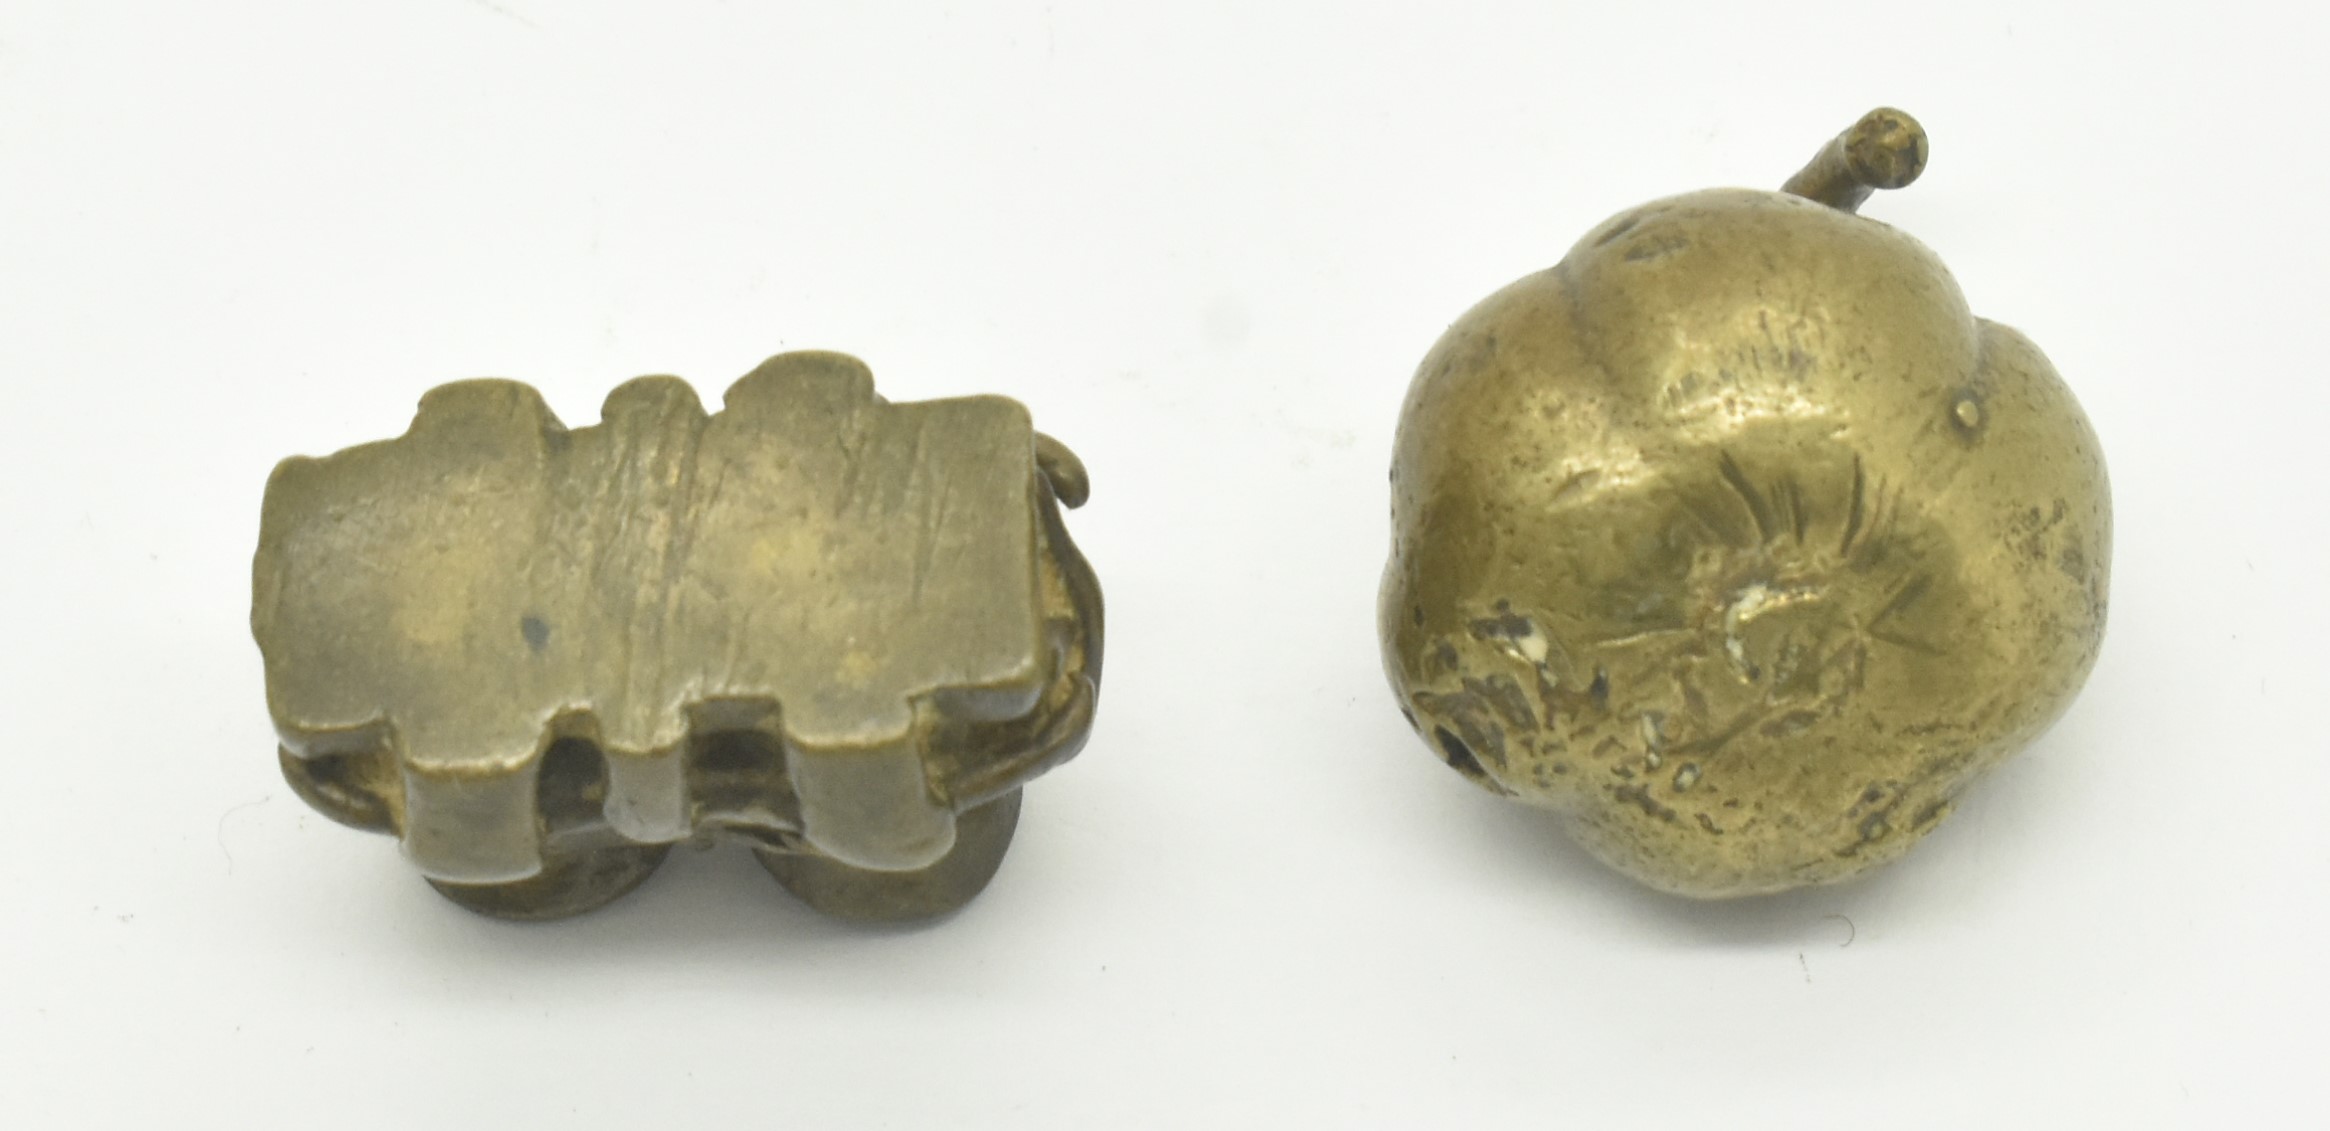 COLLECTION OF FIVE AFRICAN GHANA ASHANTI AKAN GOLD WEIGHTS - Image 8 of 8